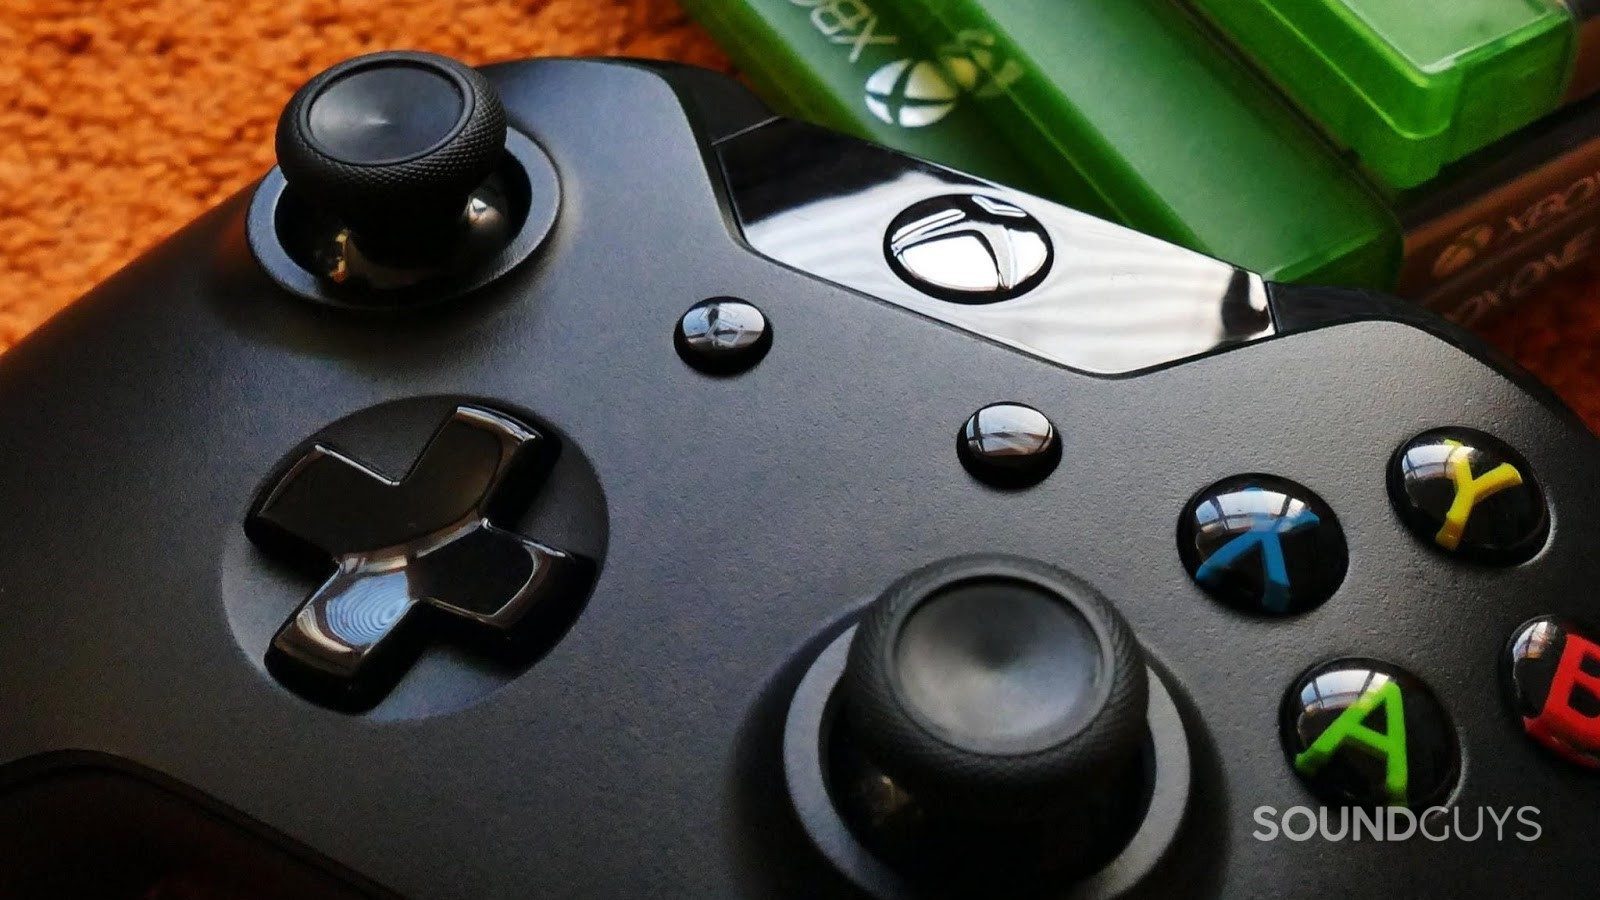 A photo of the Microsoft XBox controller resting near a stack of games - How to connect a gaming headset to your Xbox One